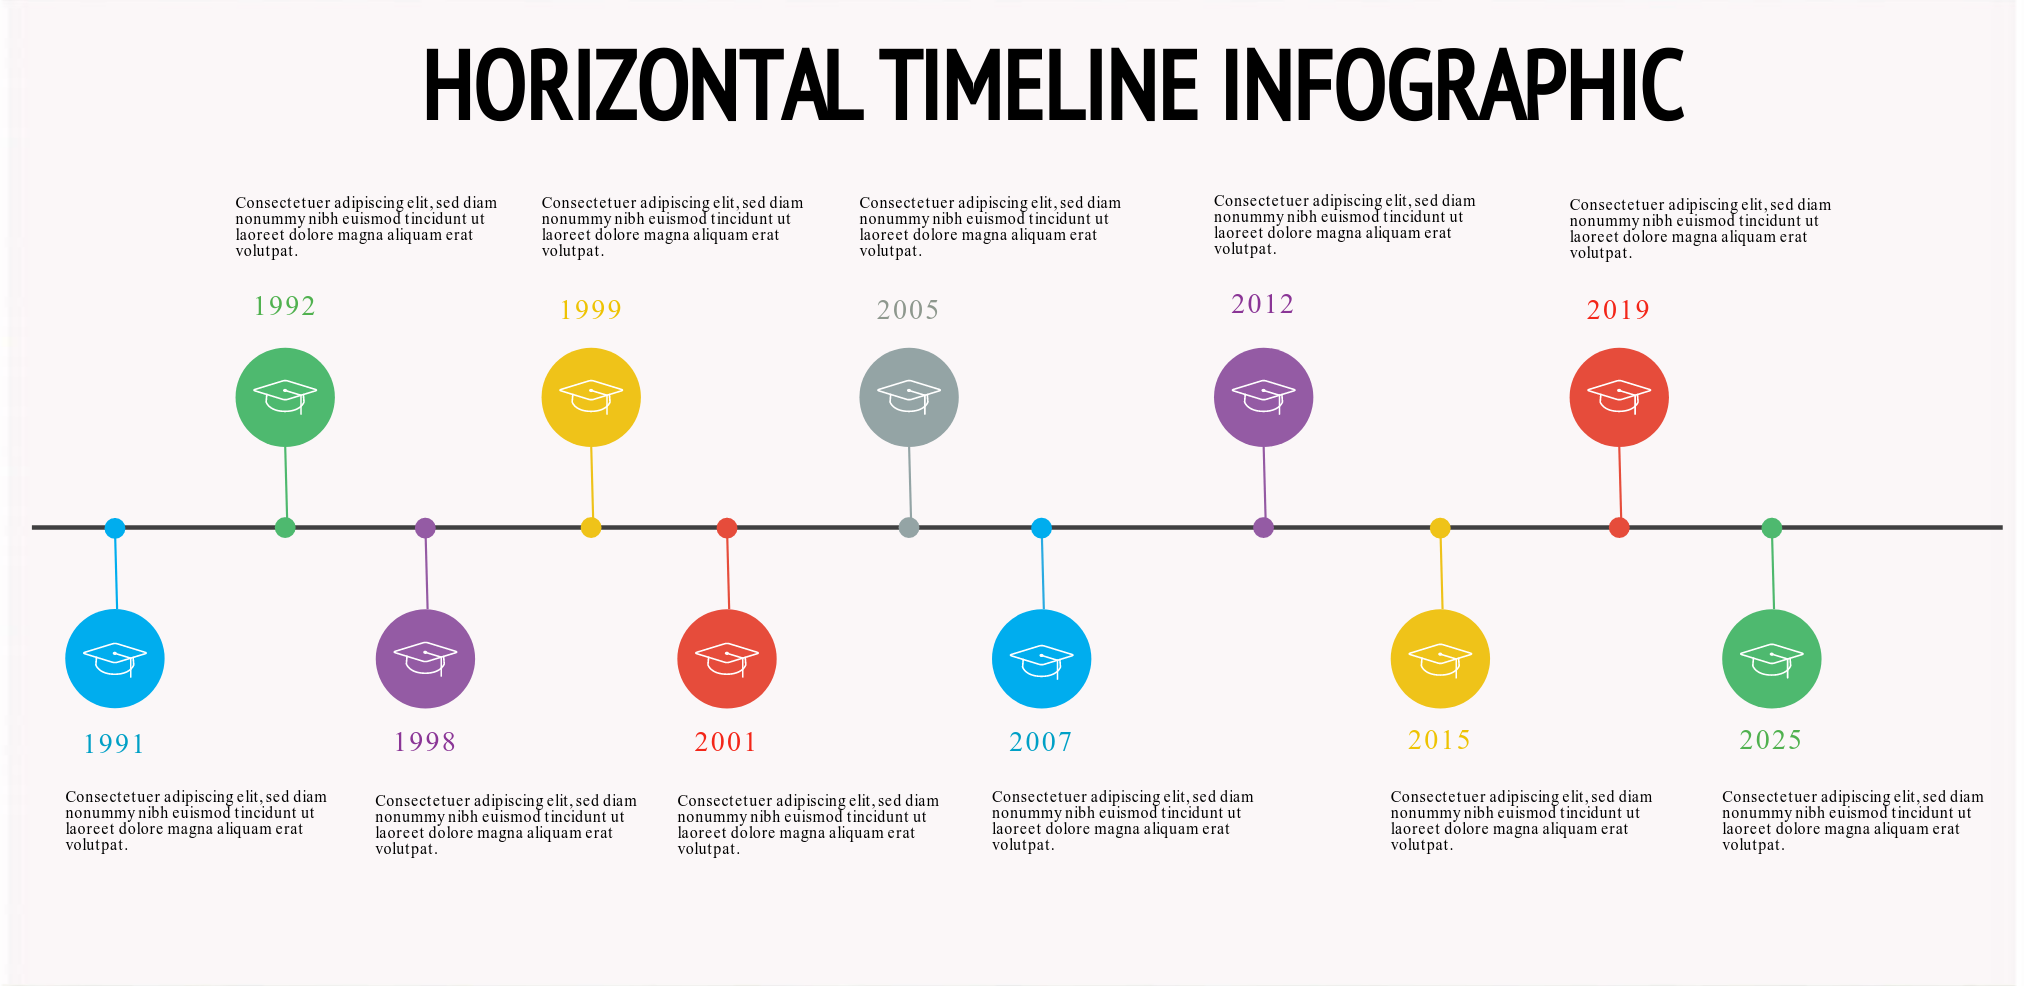 timeline infographic template powerpoint free download